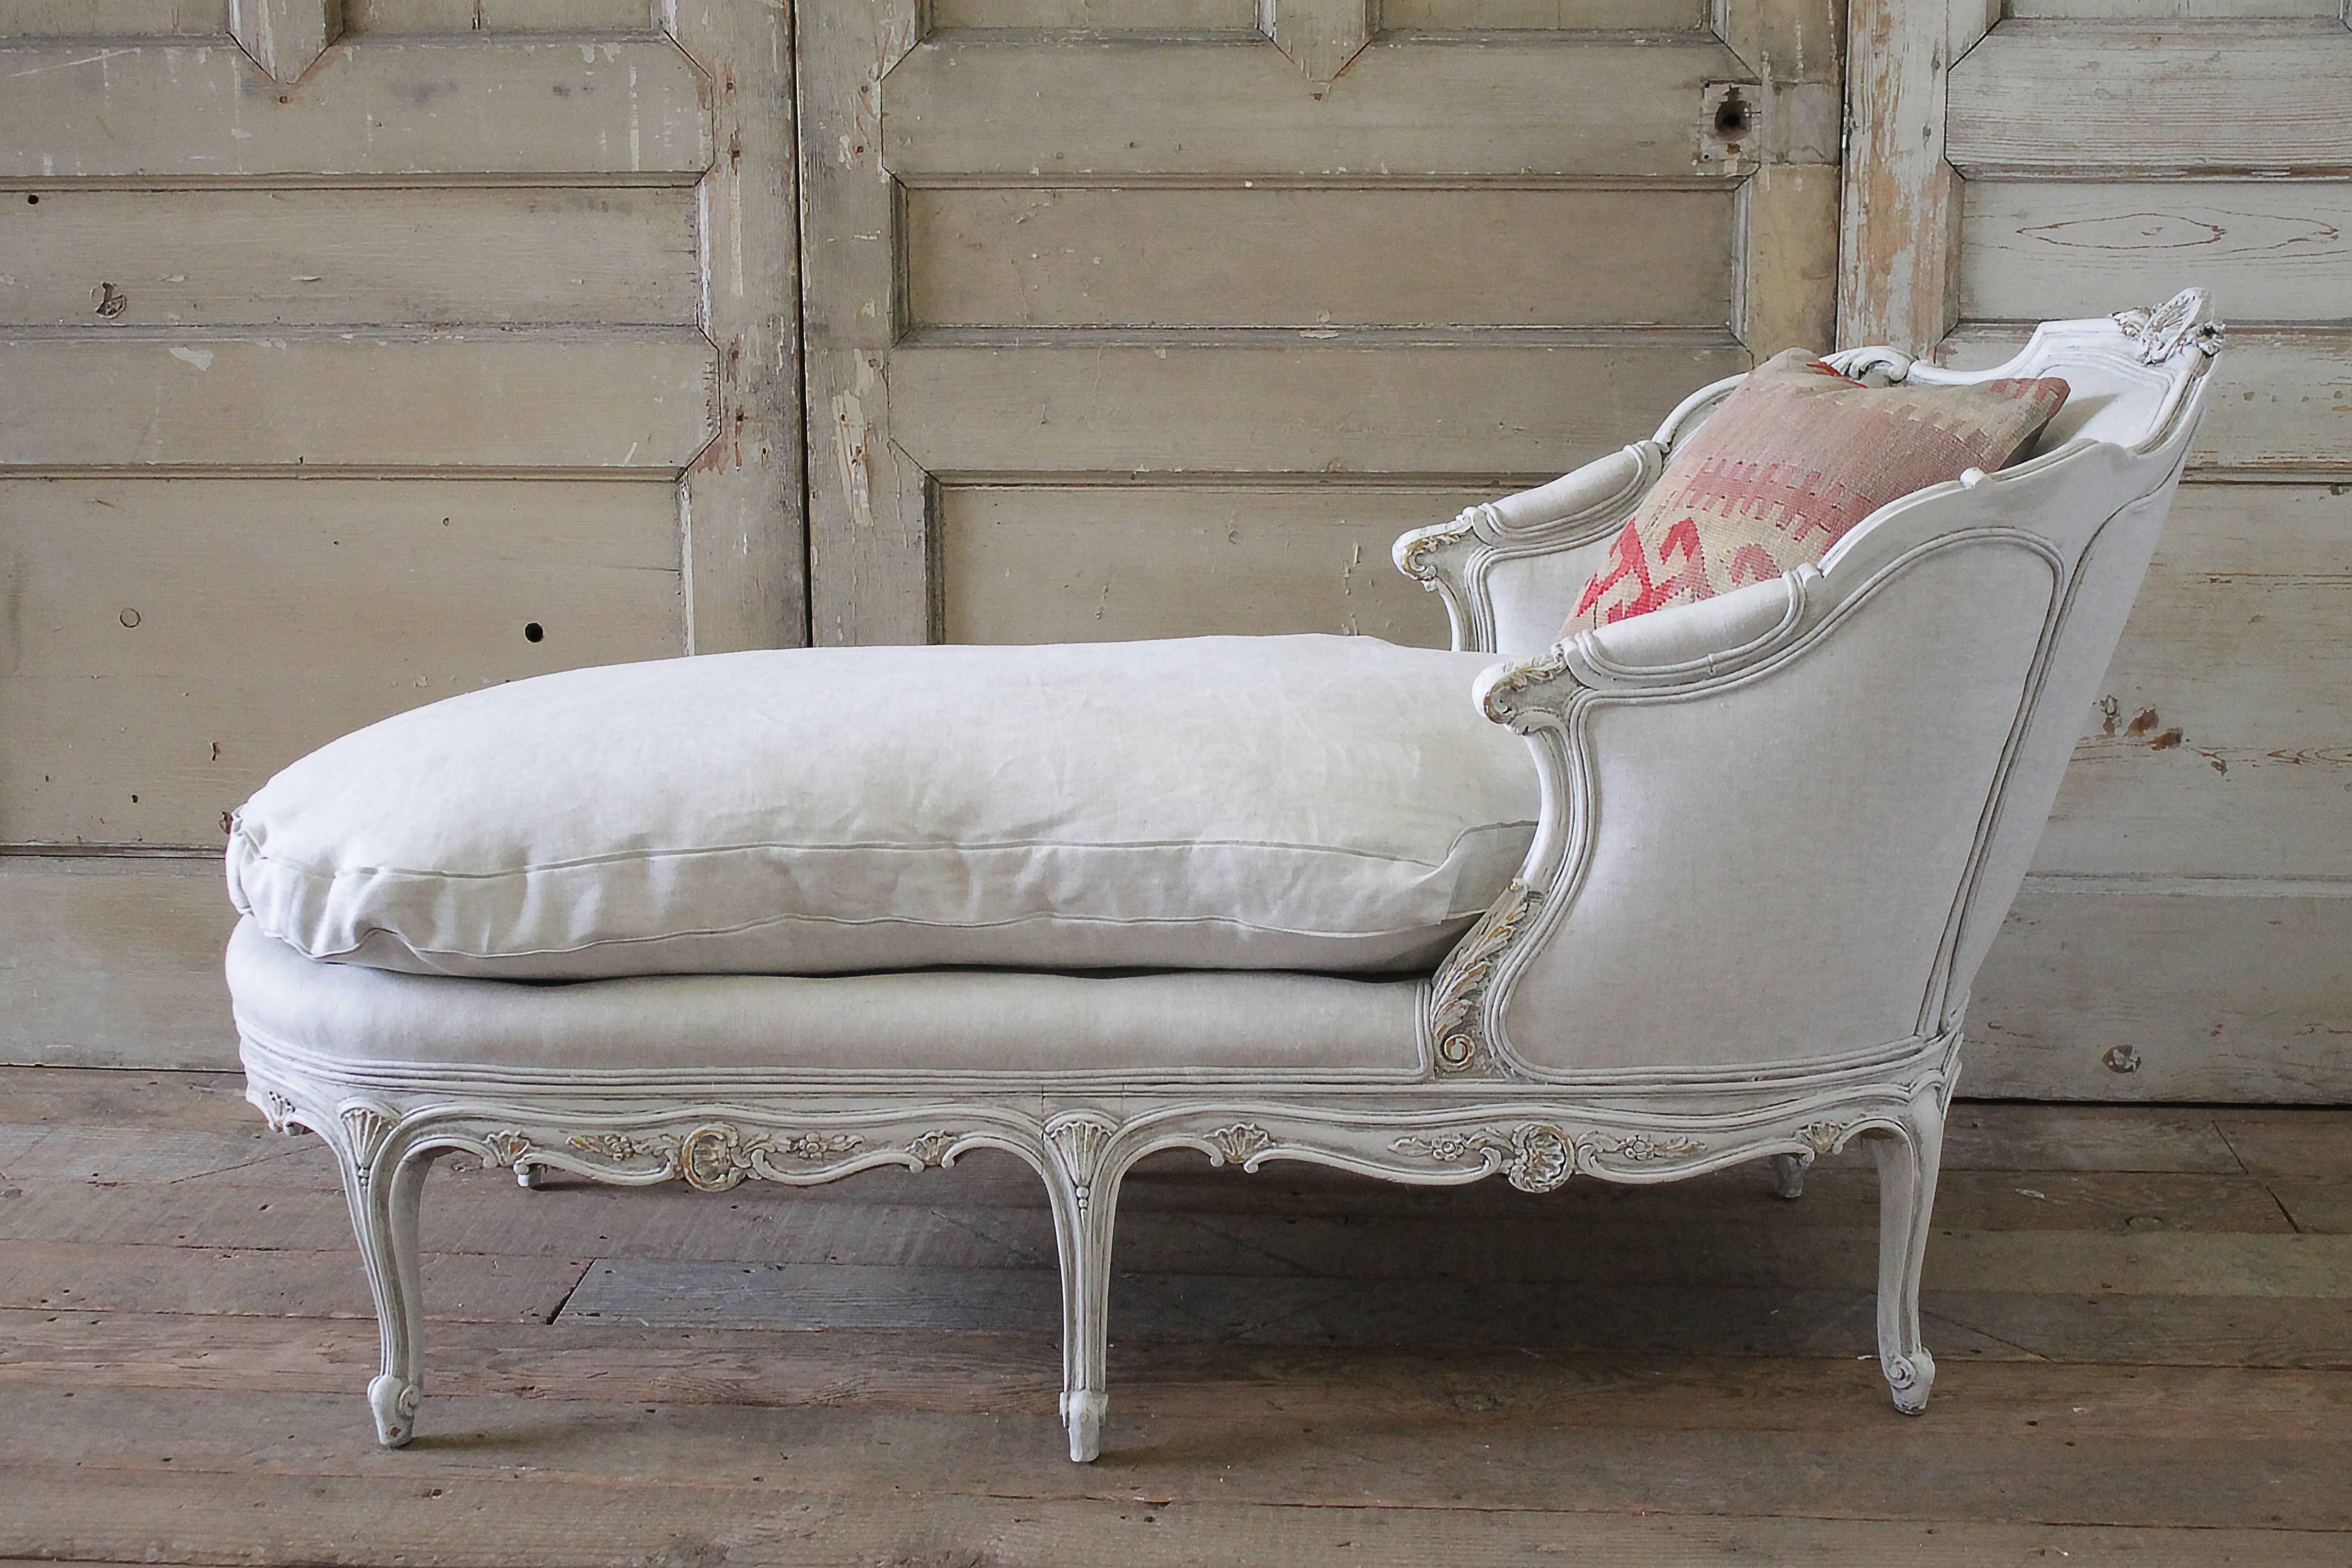 Lovely antique chaise longue in the Louis XV style, we have repainted the frame in our oyster white, originally this was a dark creamy yellow color with gilded carvings. Our oyster white is off-white, with subtle tones of grey. Reupholstered in our